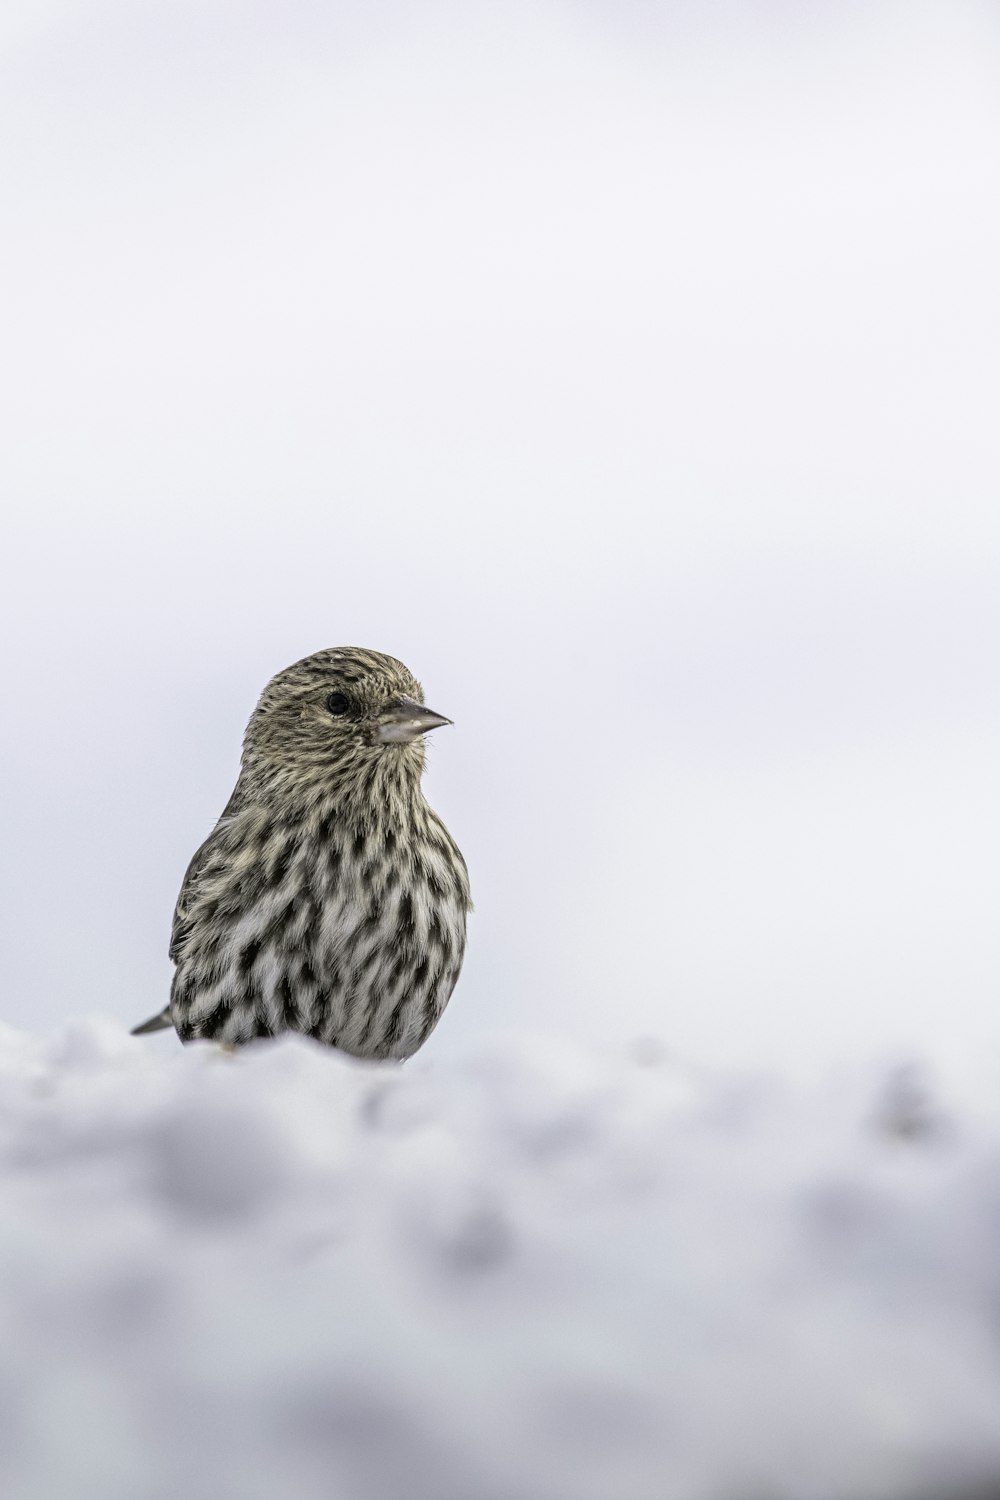 a small bird sitting on top of a snow covered ground